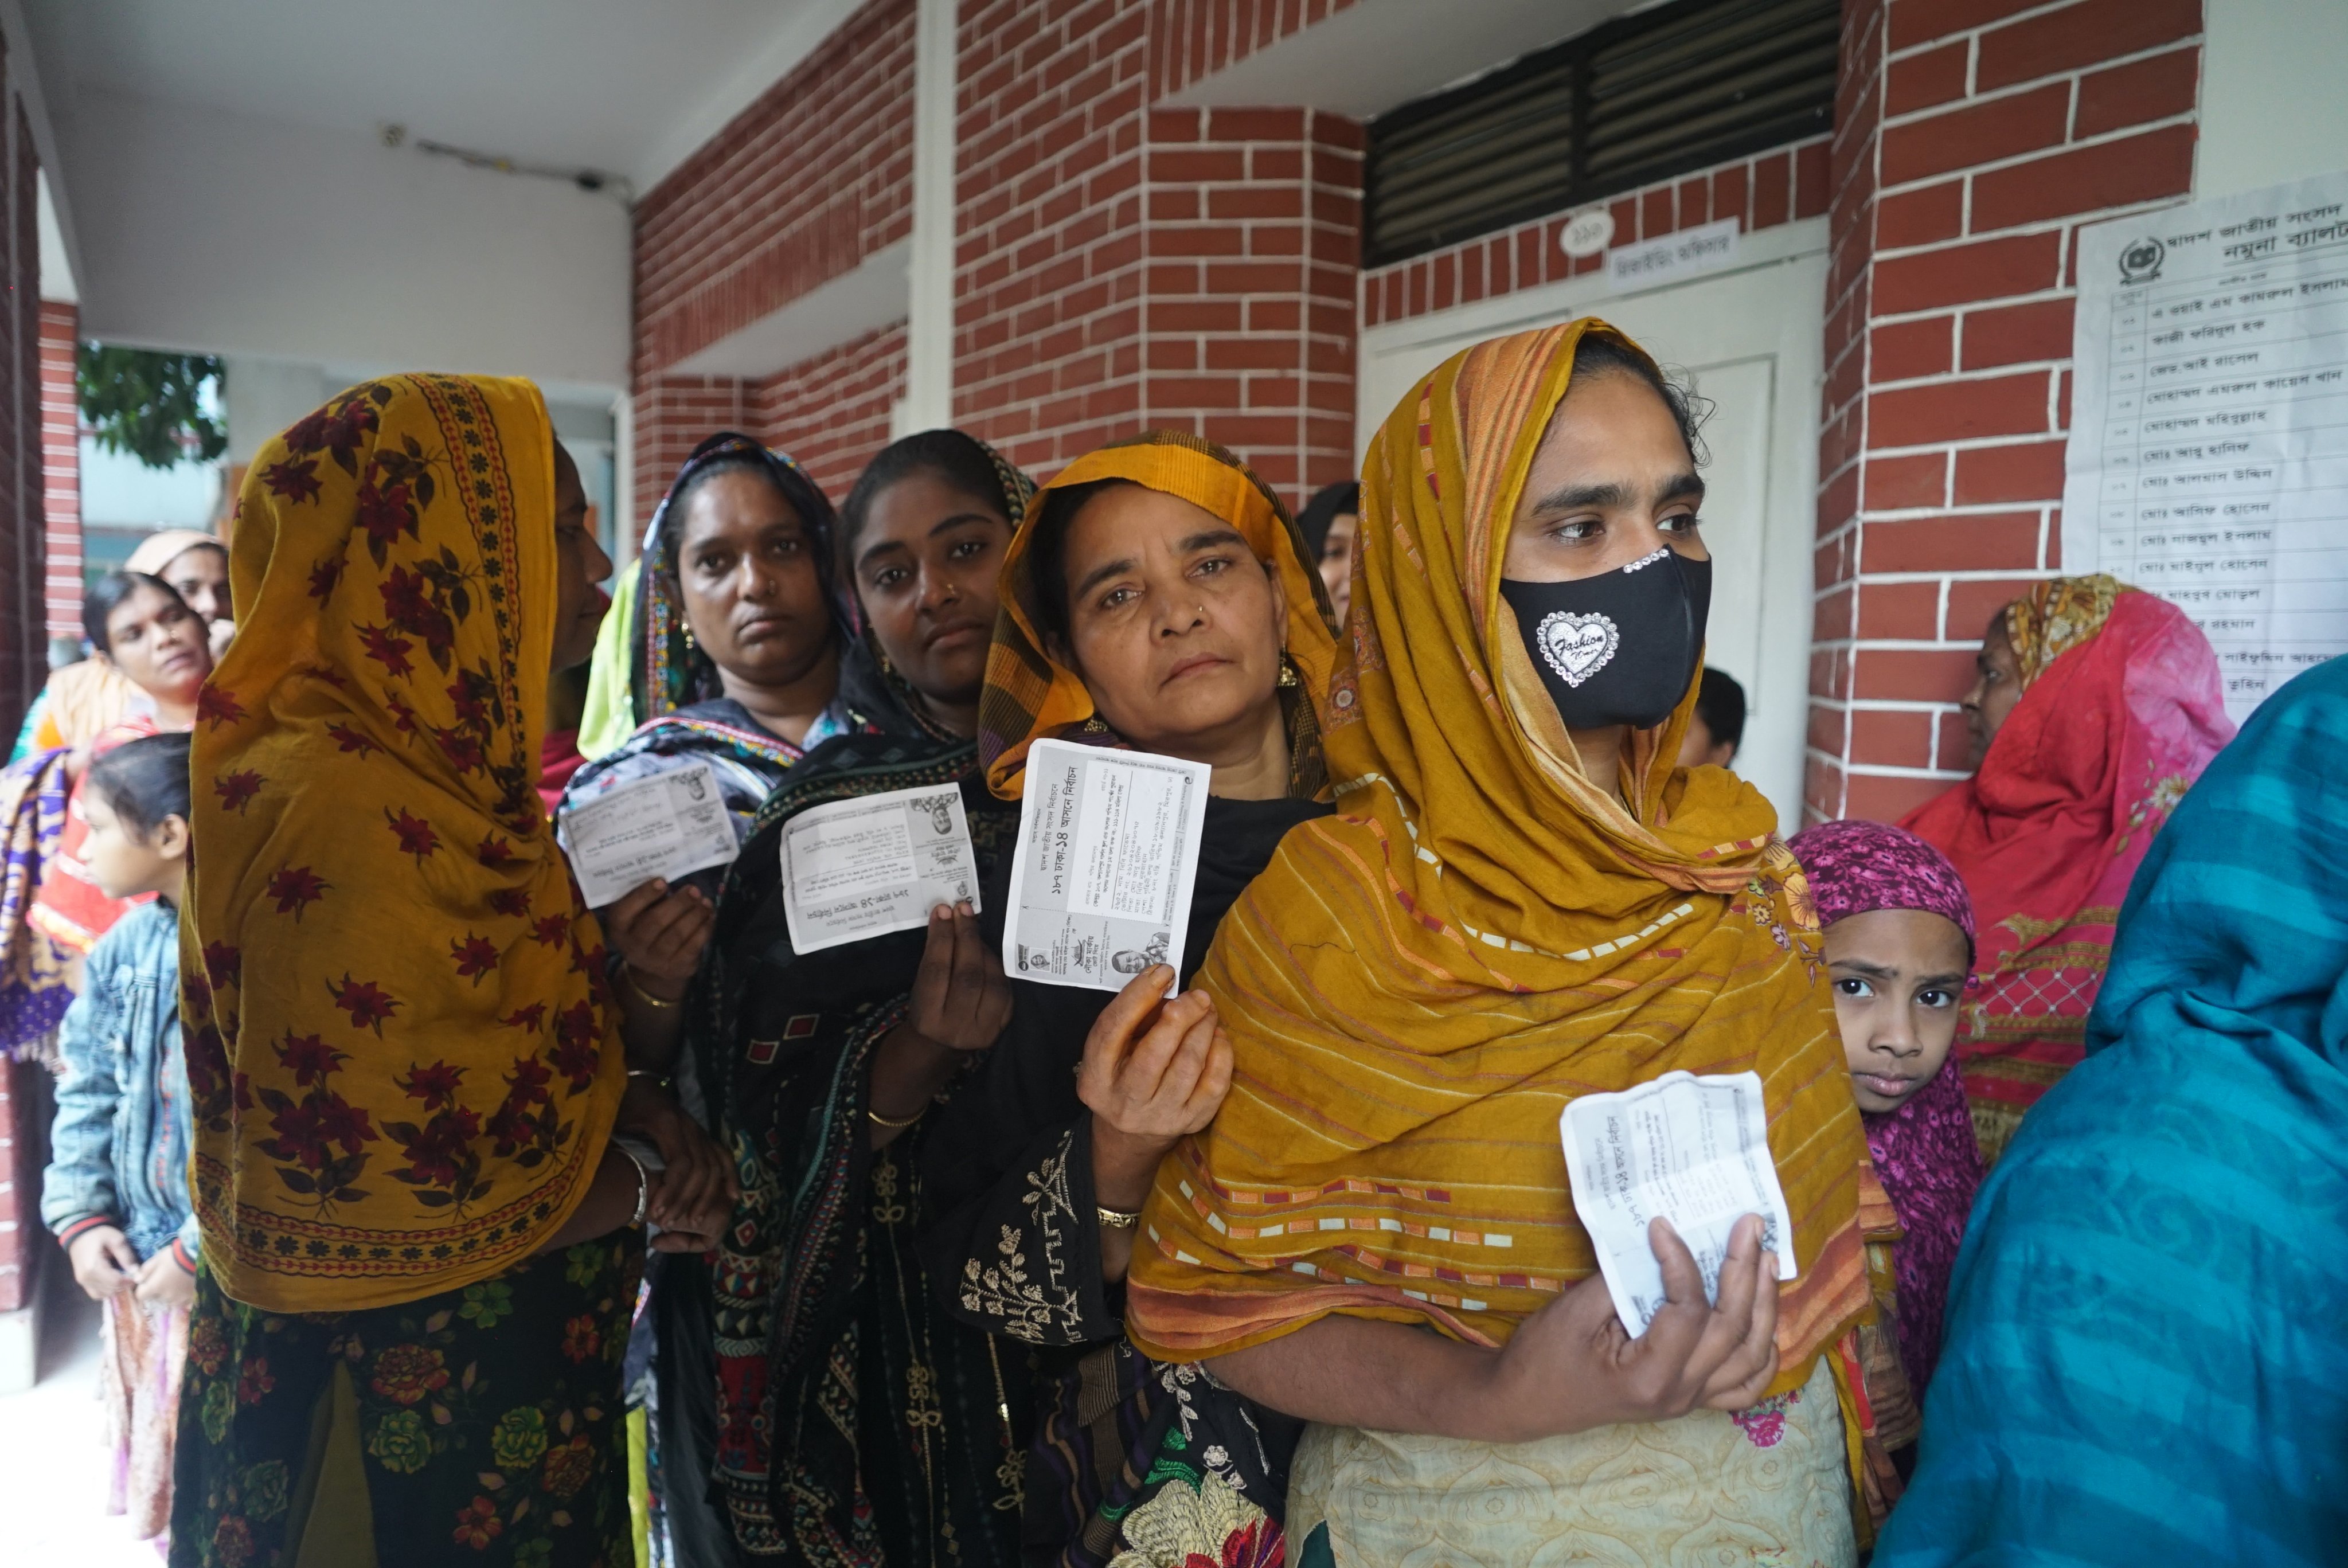 Voters queue up at a polling station in Dhaka on Sunday. Photo: Xinhua